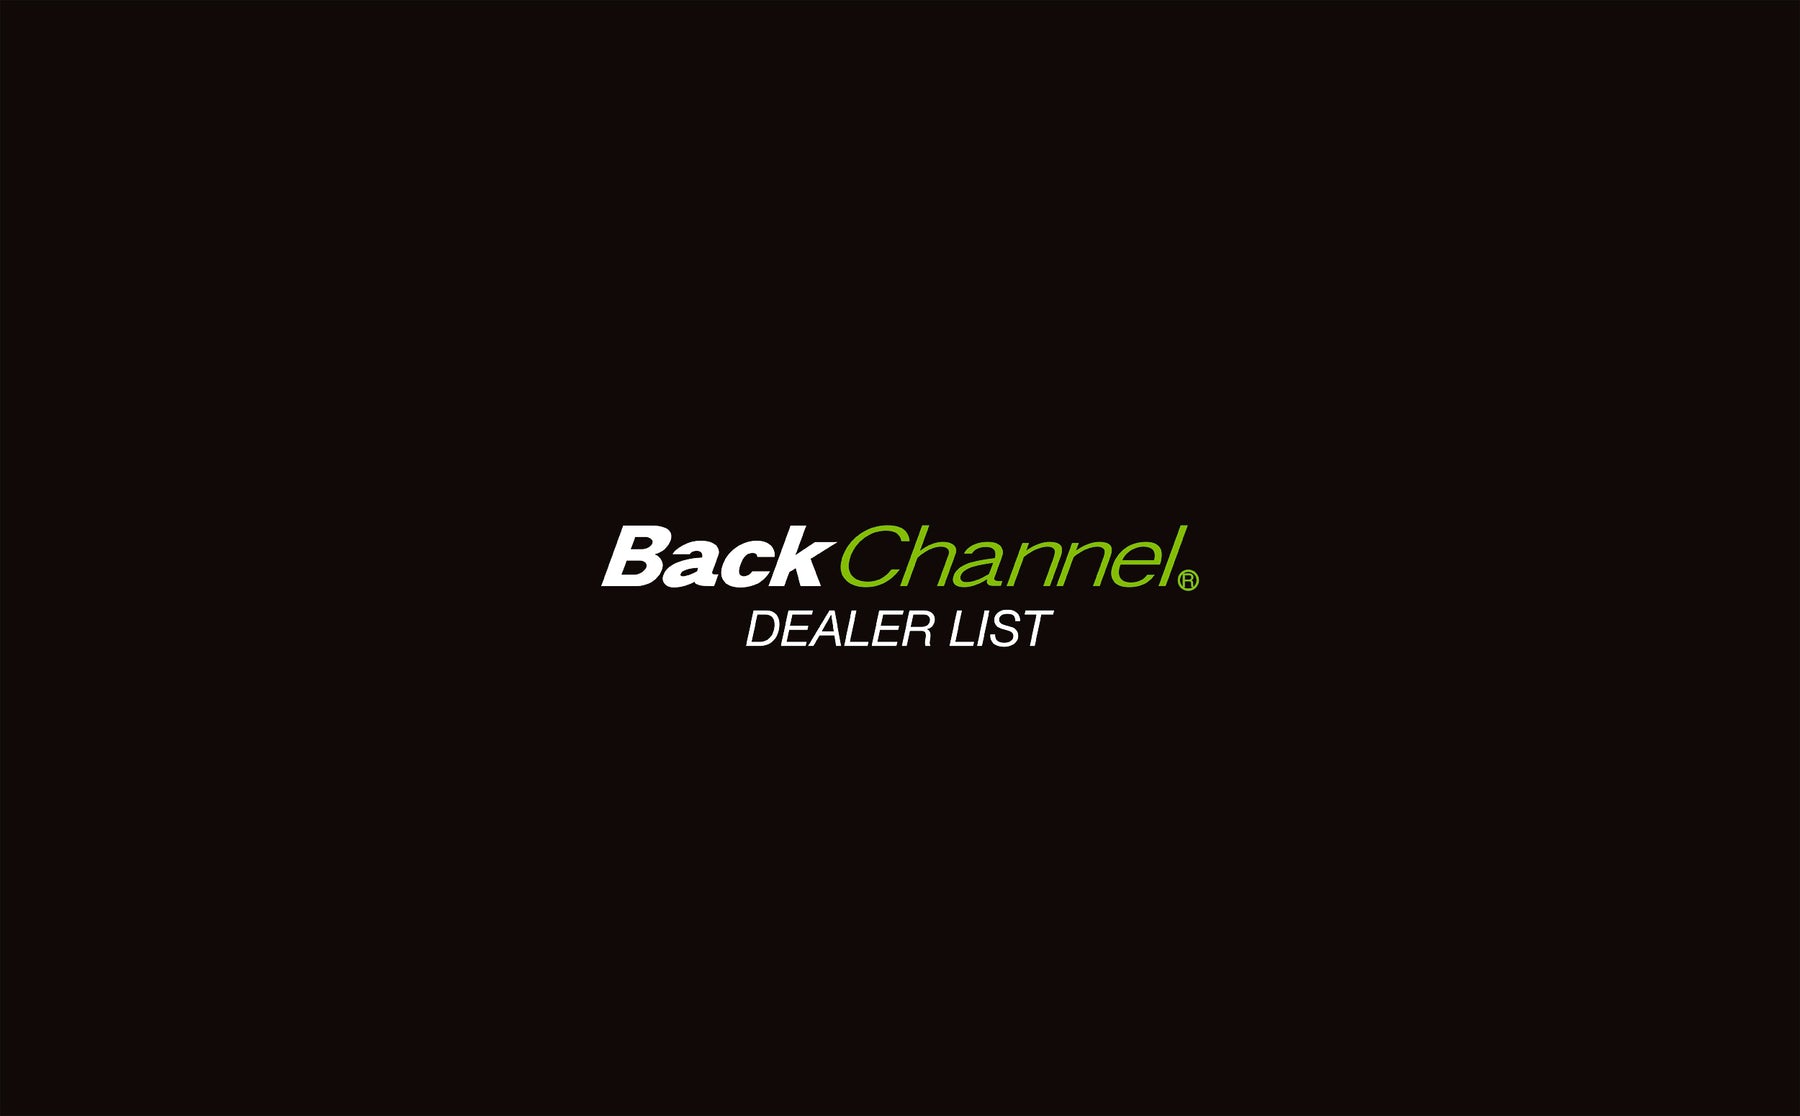 Back channel